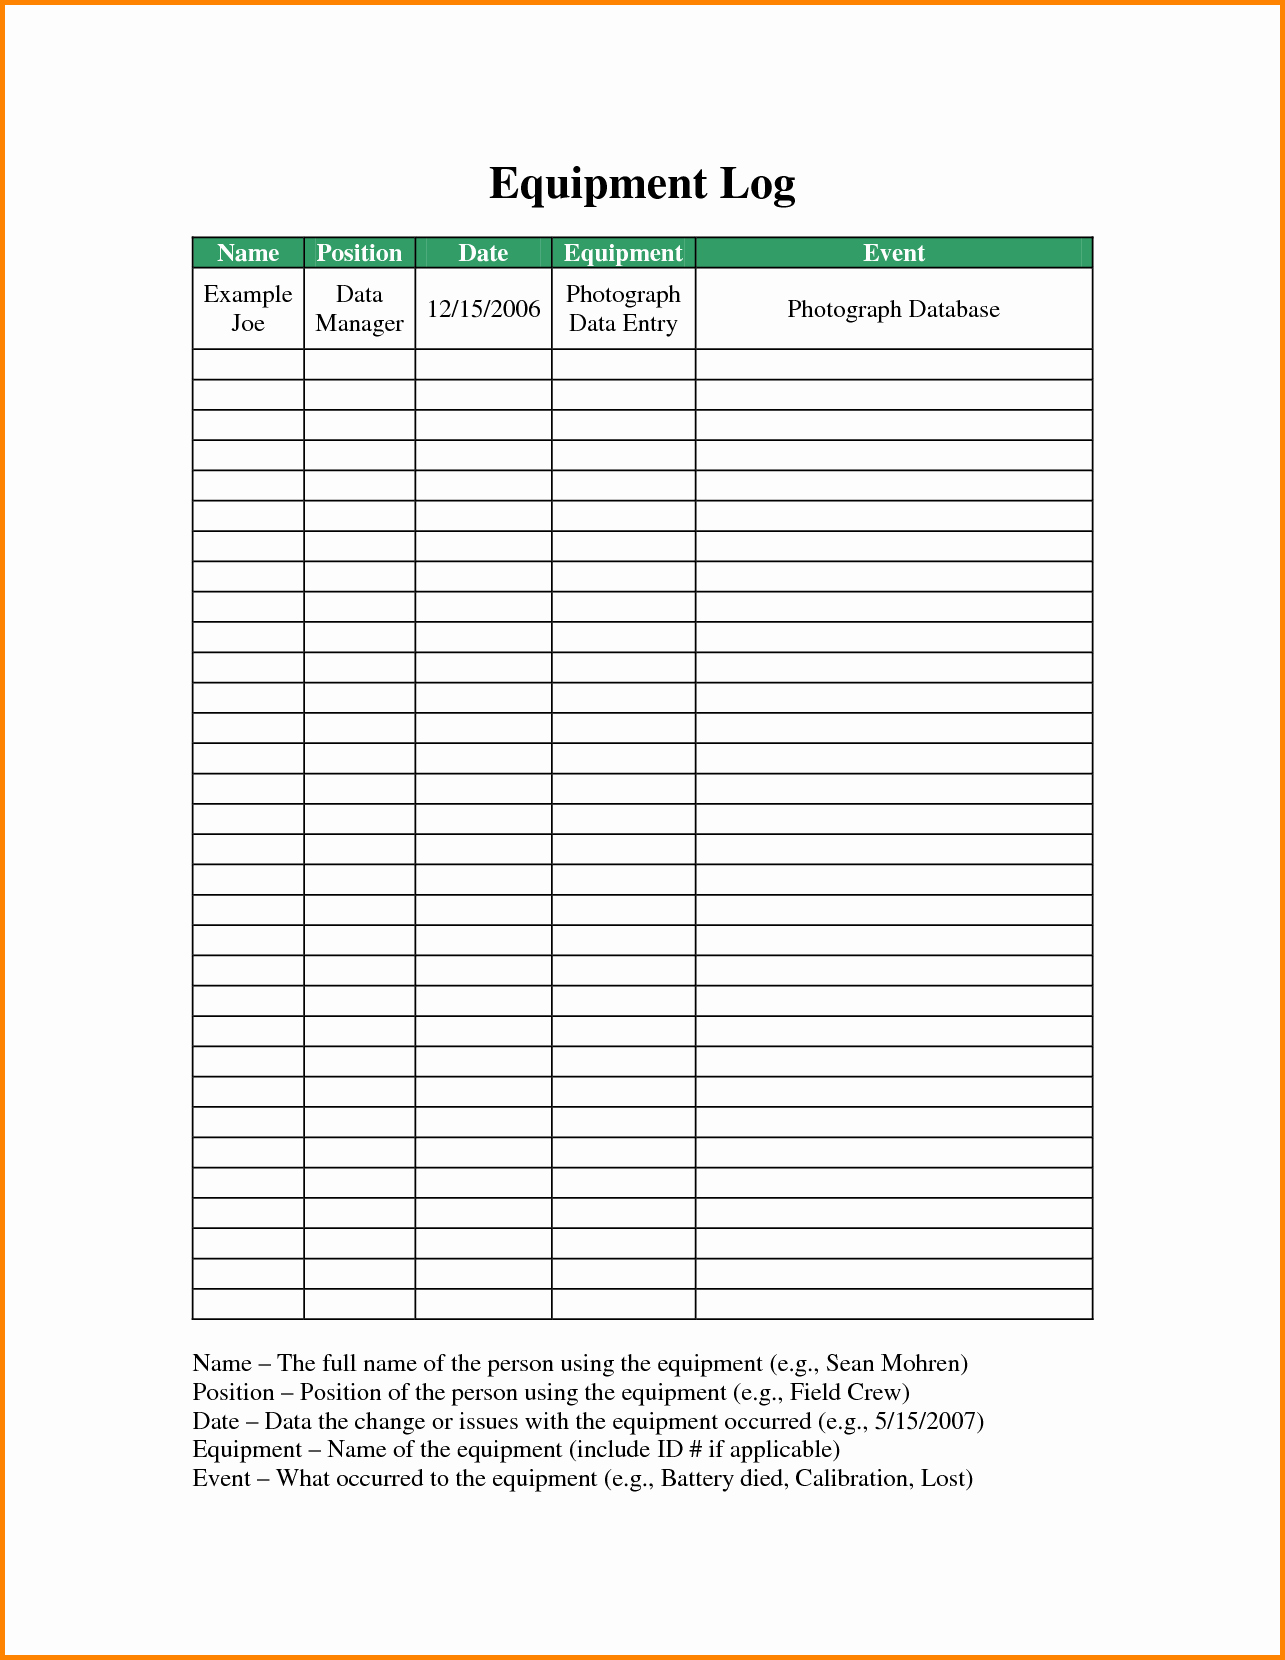 Equipment Maintenance Log Template Excel Luxury Equipment Maintenance Log Template 11 Things Nobody told